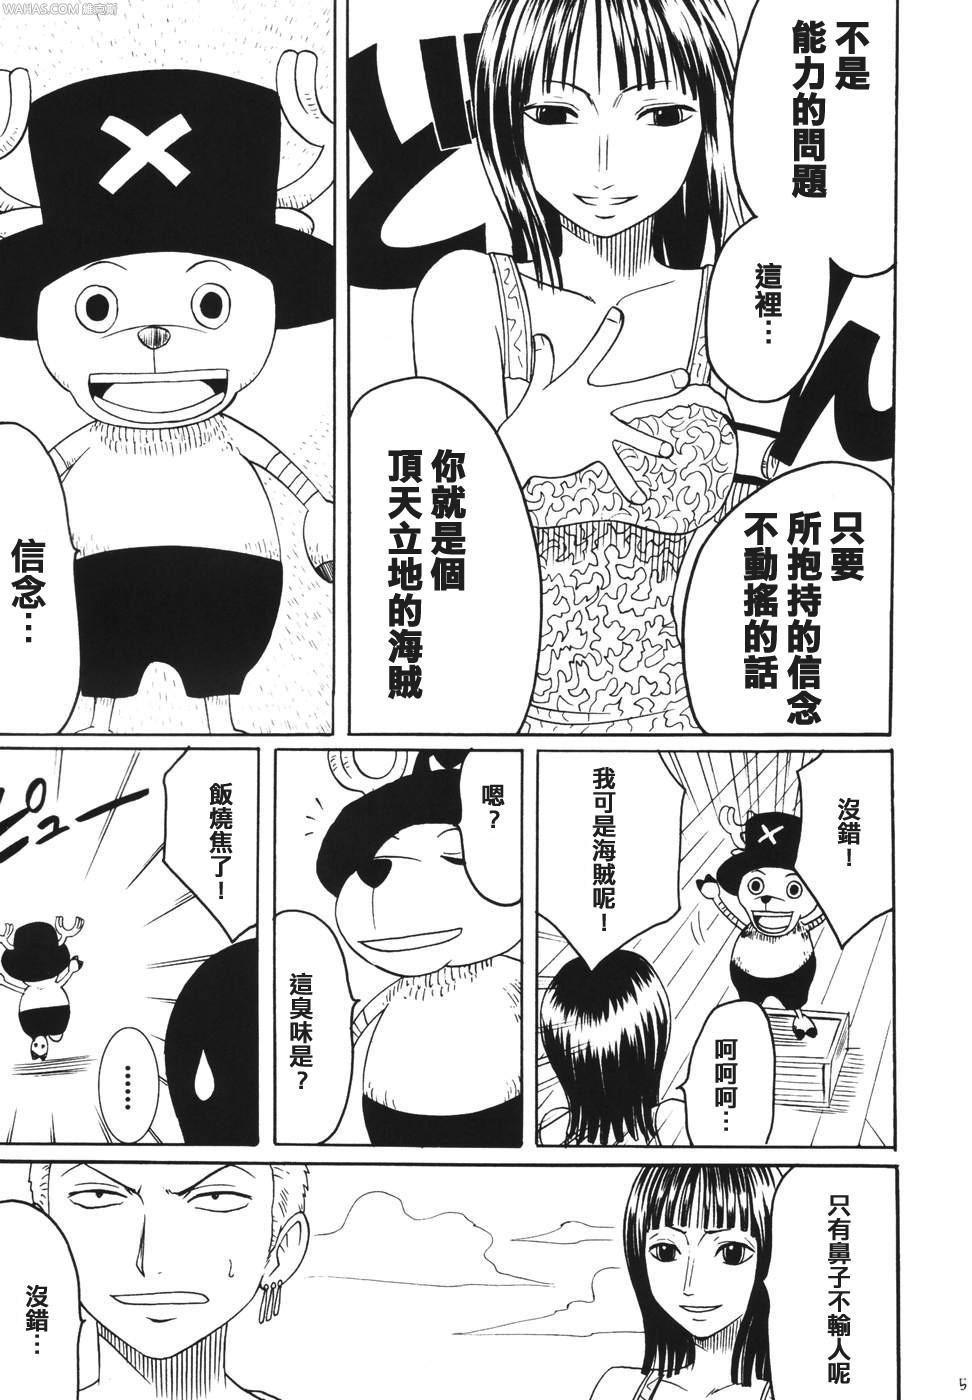 Exhibitionist Dancing Animation Run - One piece Spy - Page 4